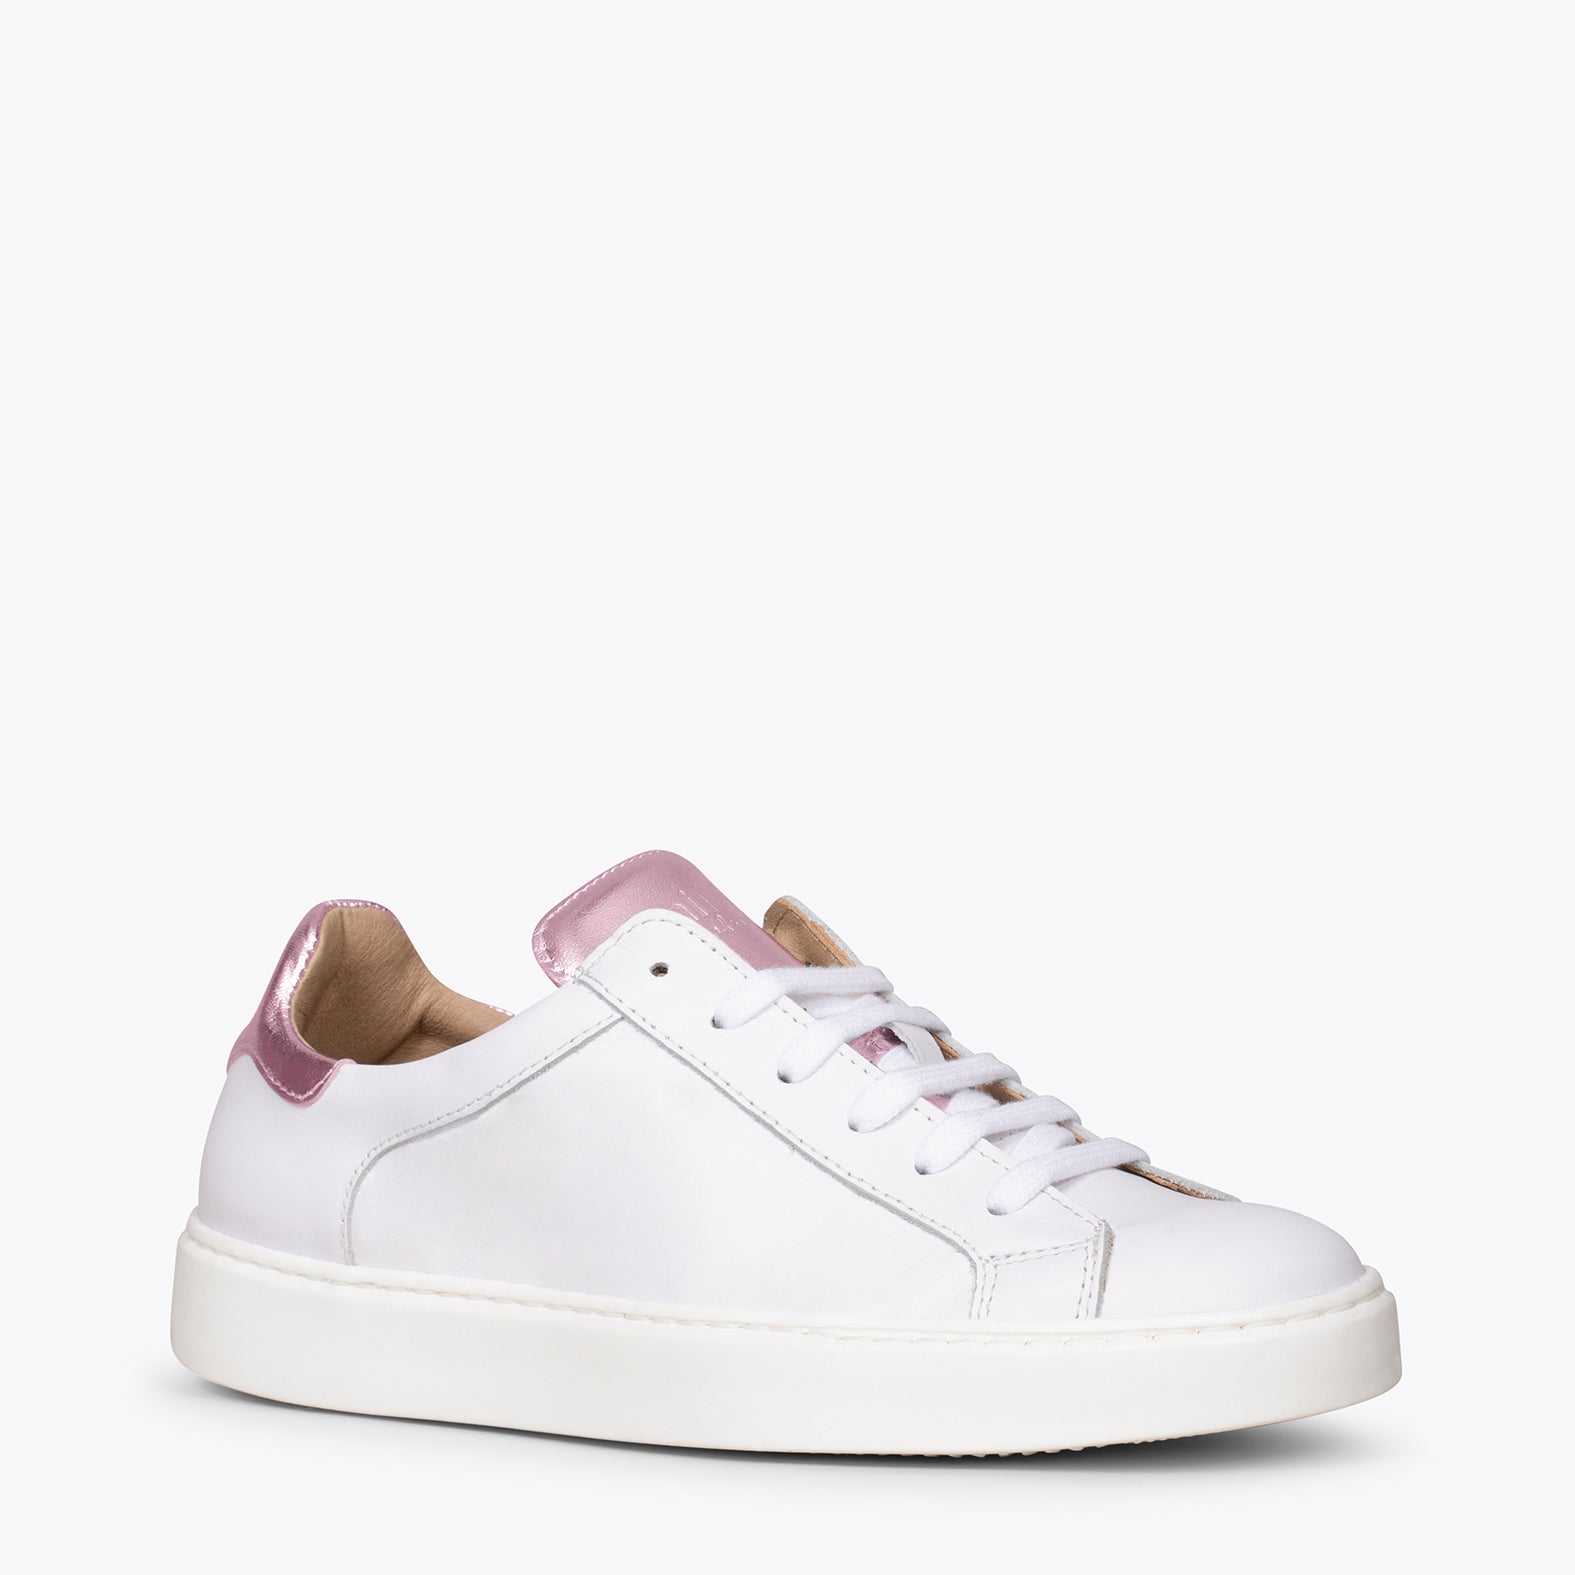 SNEAKER – WHITE casual sneaker with PINK detail